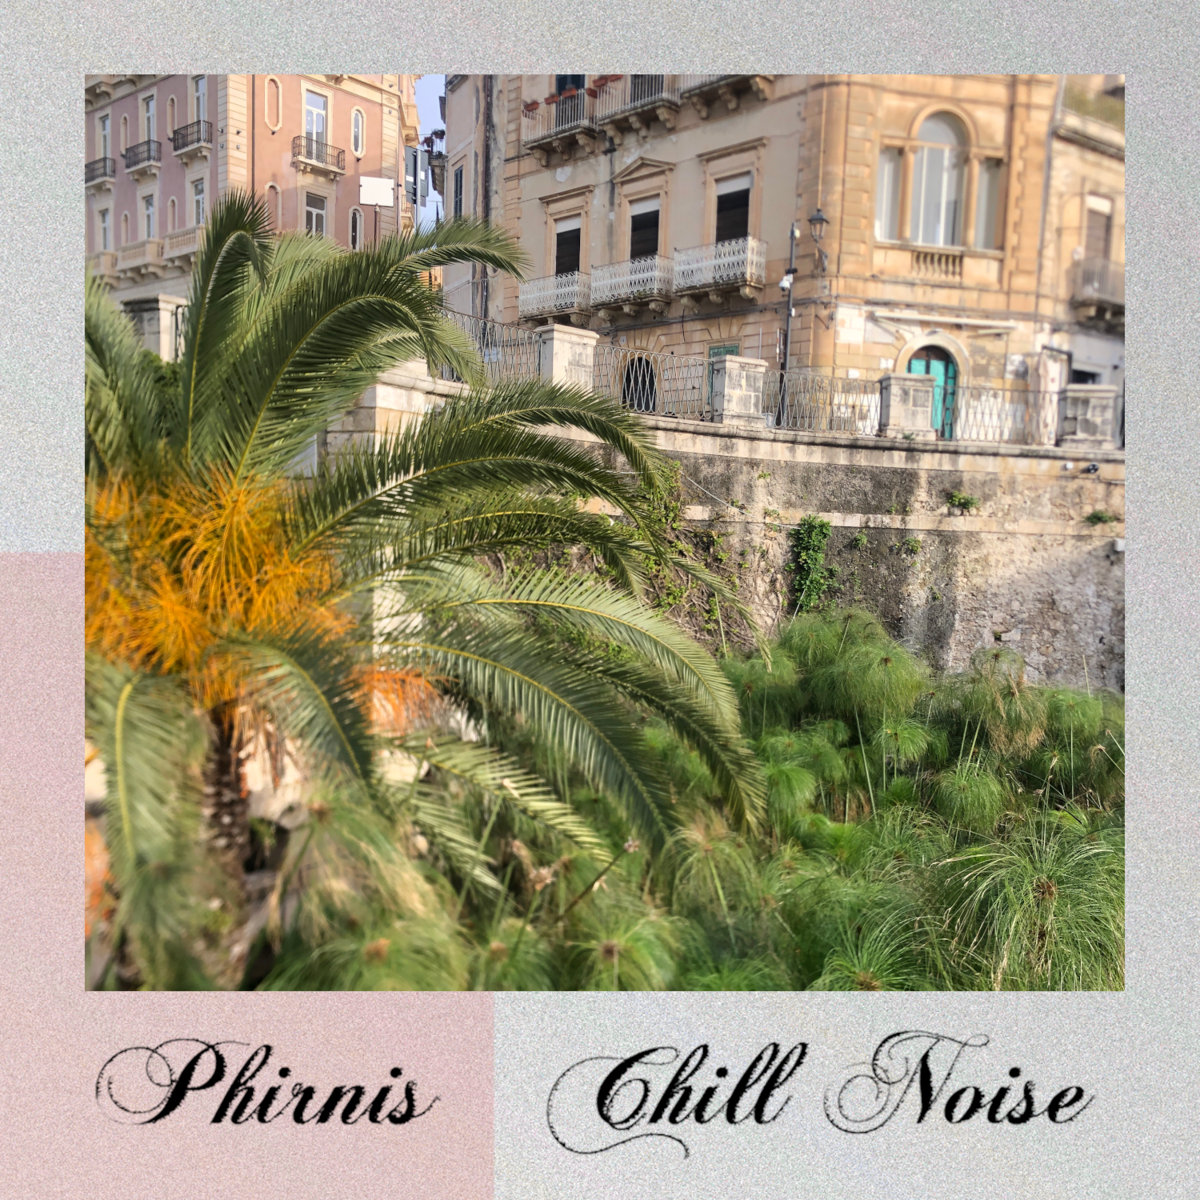 Chill Noise, by Phirnis